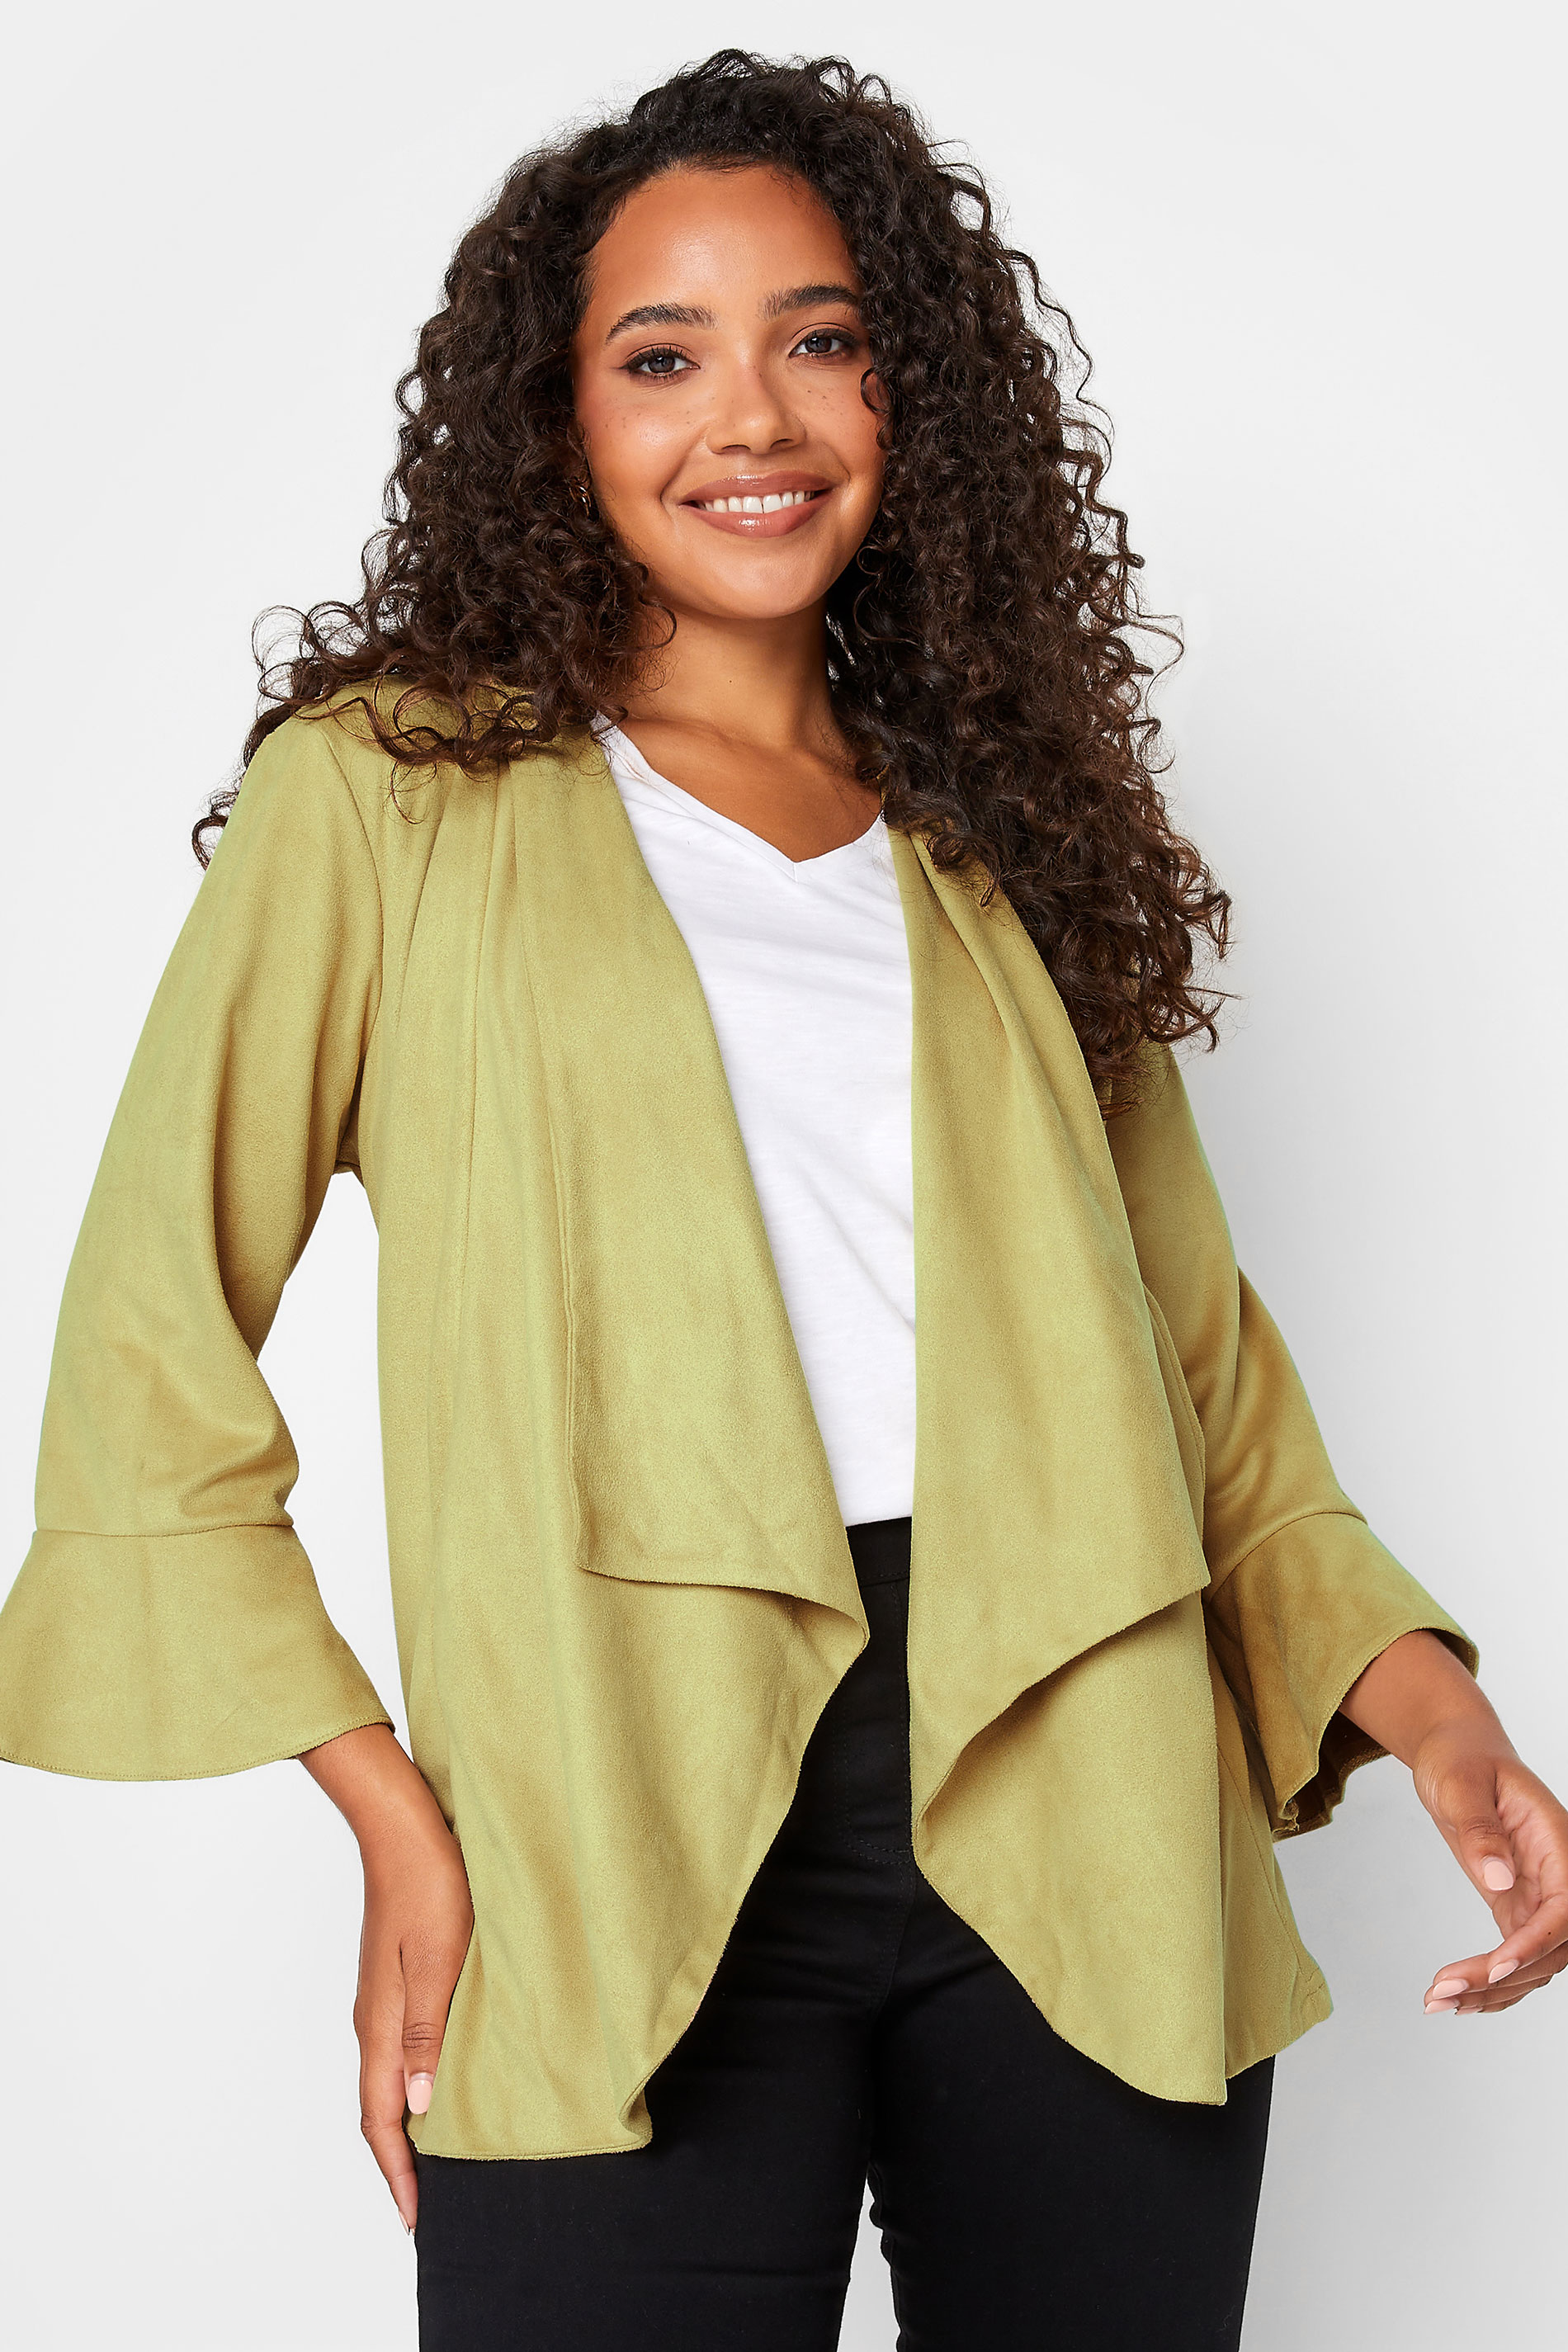 M&Co Mustard Yellow Suedette Waterfall Jacket | M&Co  1